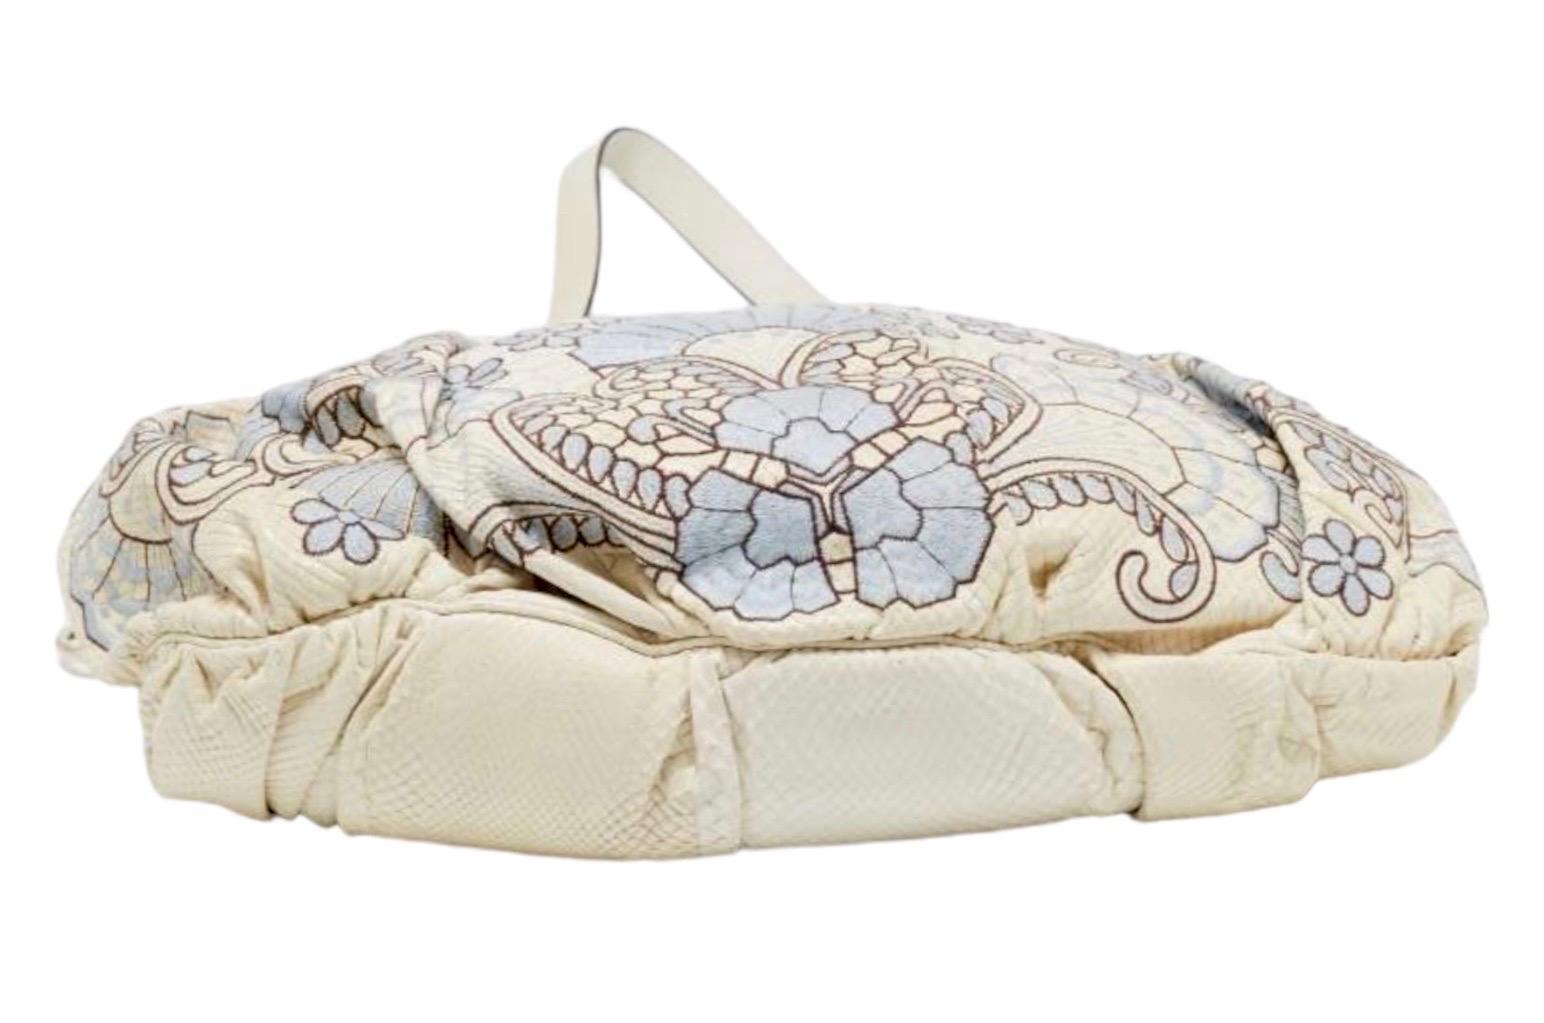 GUCCI Limited Edition Exotic Python Skin Embroidered Cream Hand Bag with Crest  For Sale 1